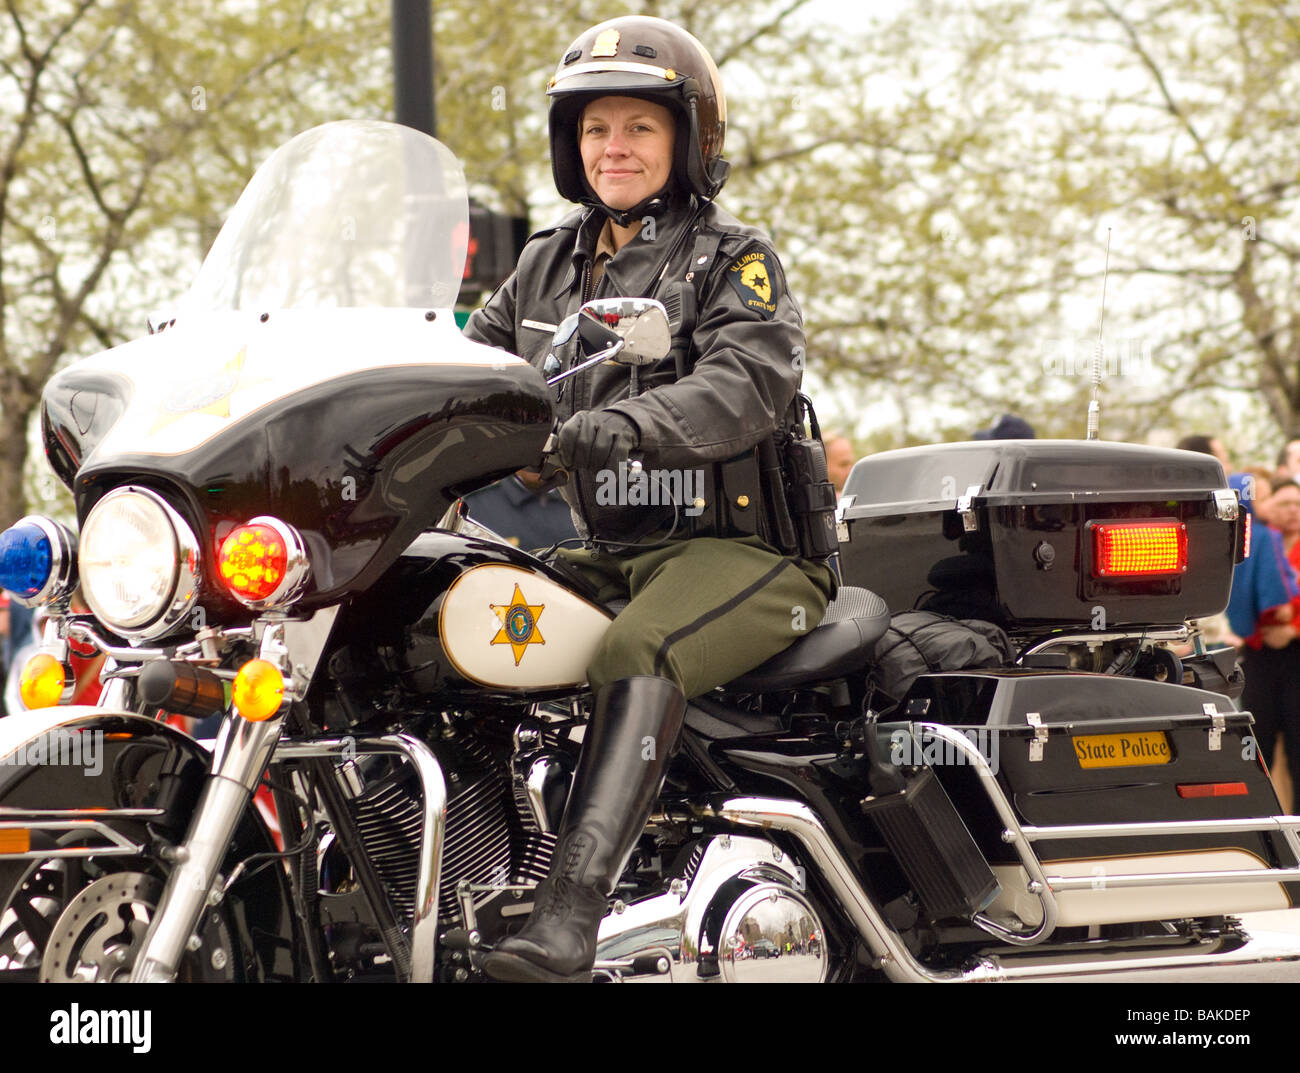 Grinning female state trooper drives motorcycle in Chicago Polish Parade Stock Photo